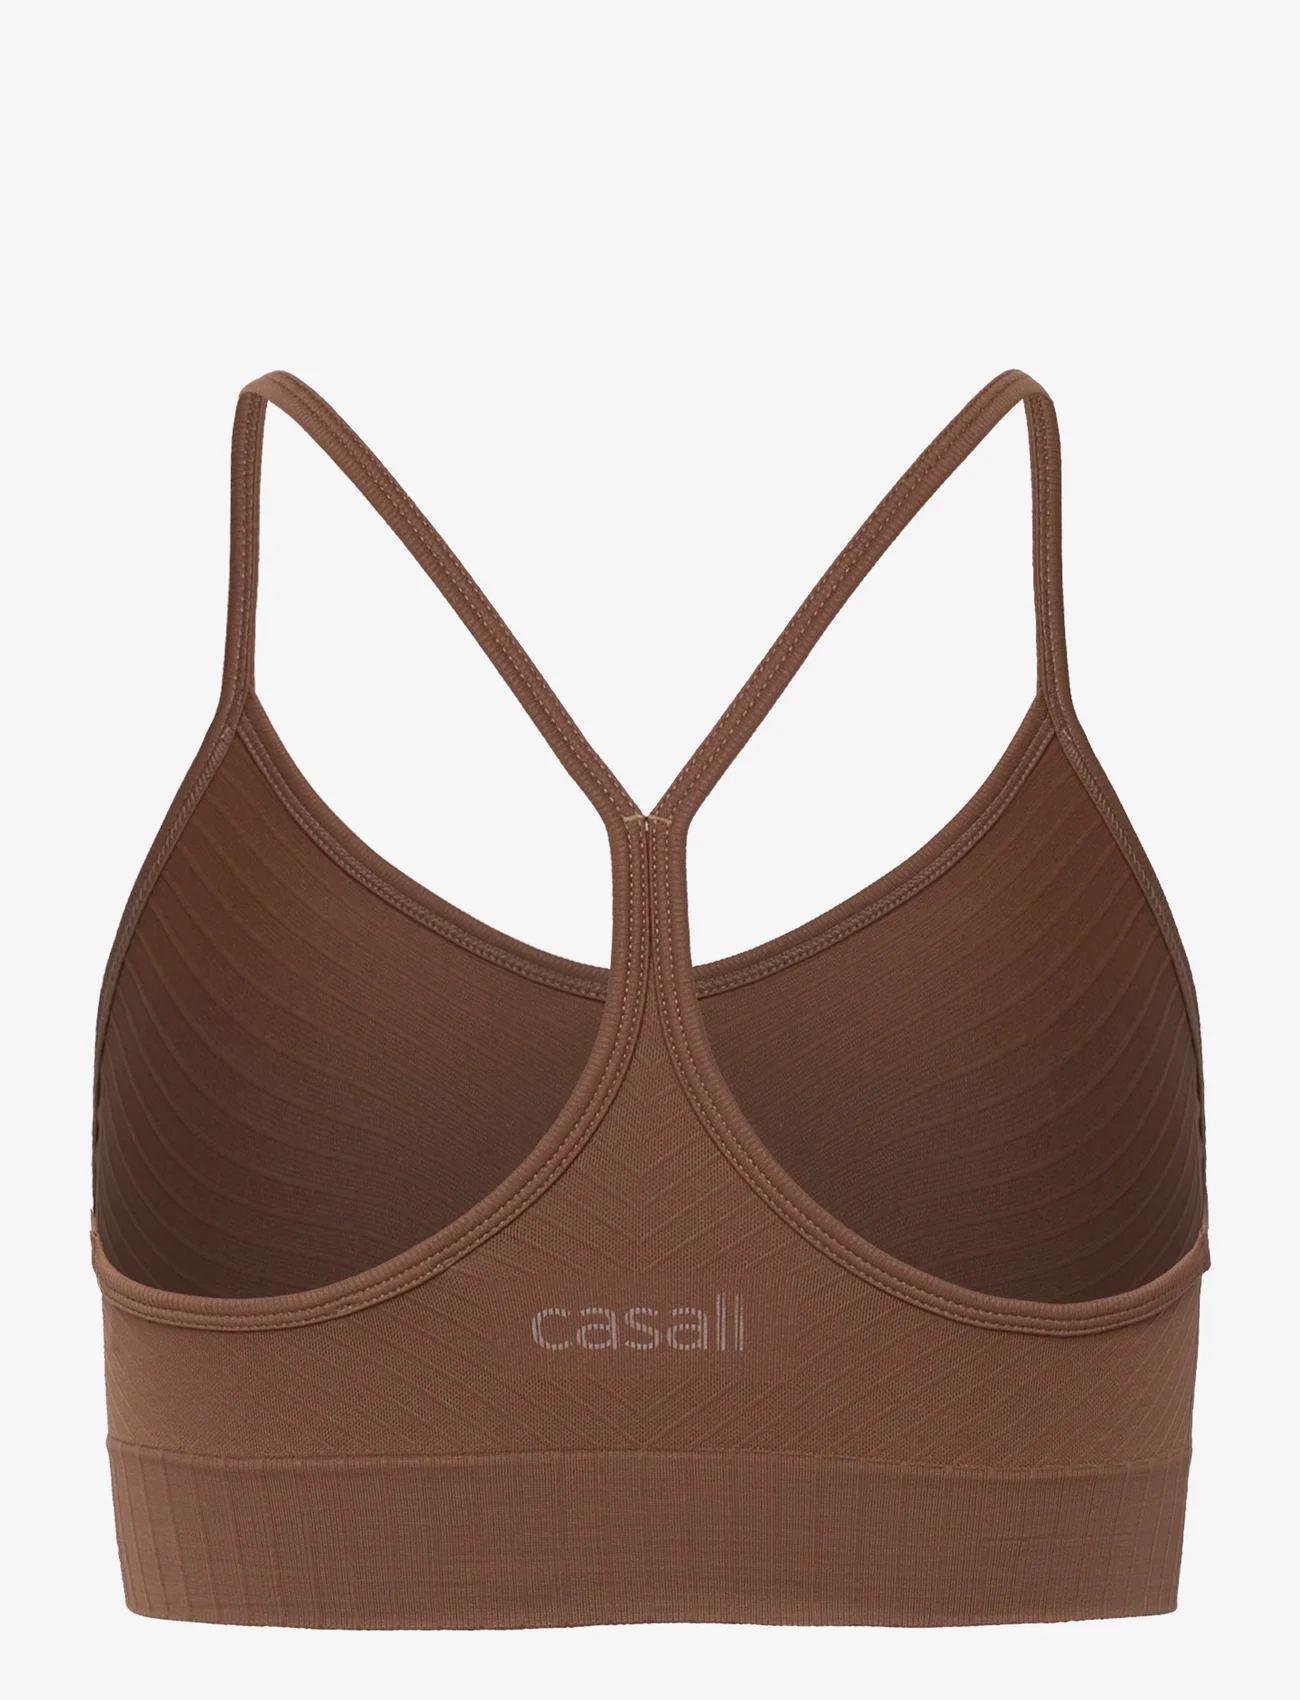 Casall - Seamless Graphical Rib Sports Top - sport bras - taupe brown - 1